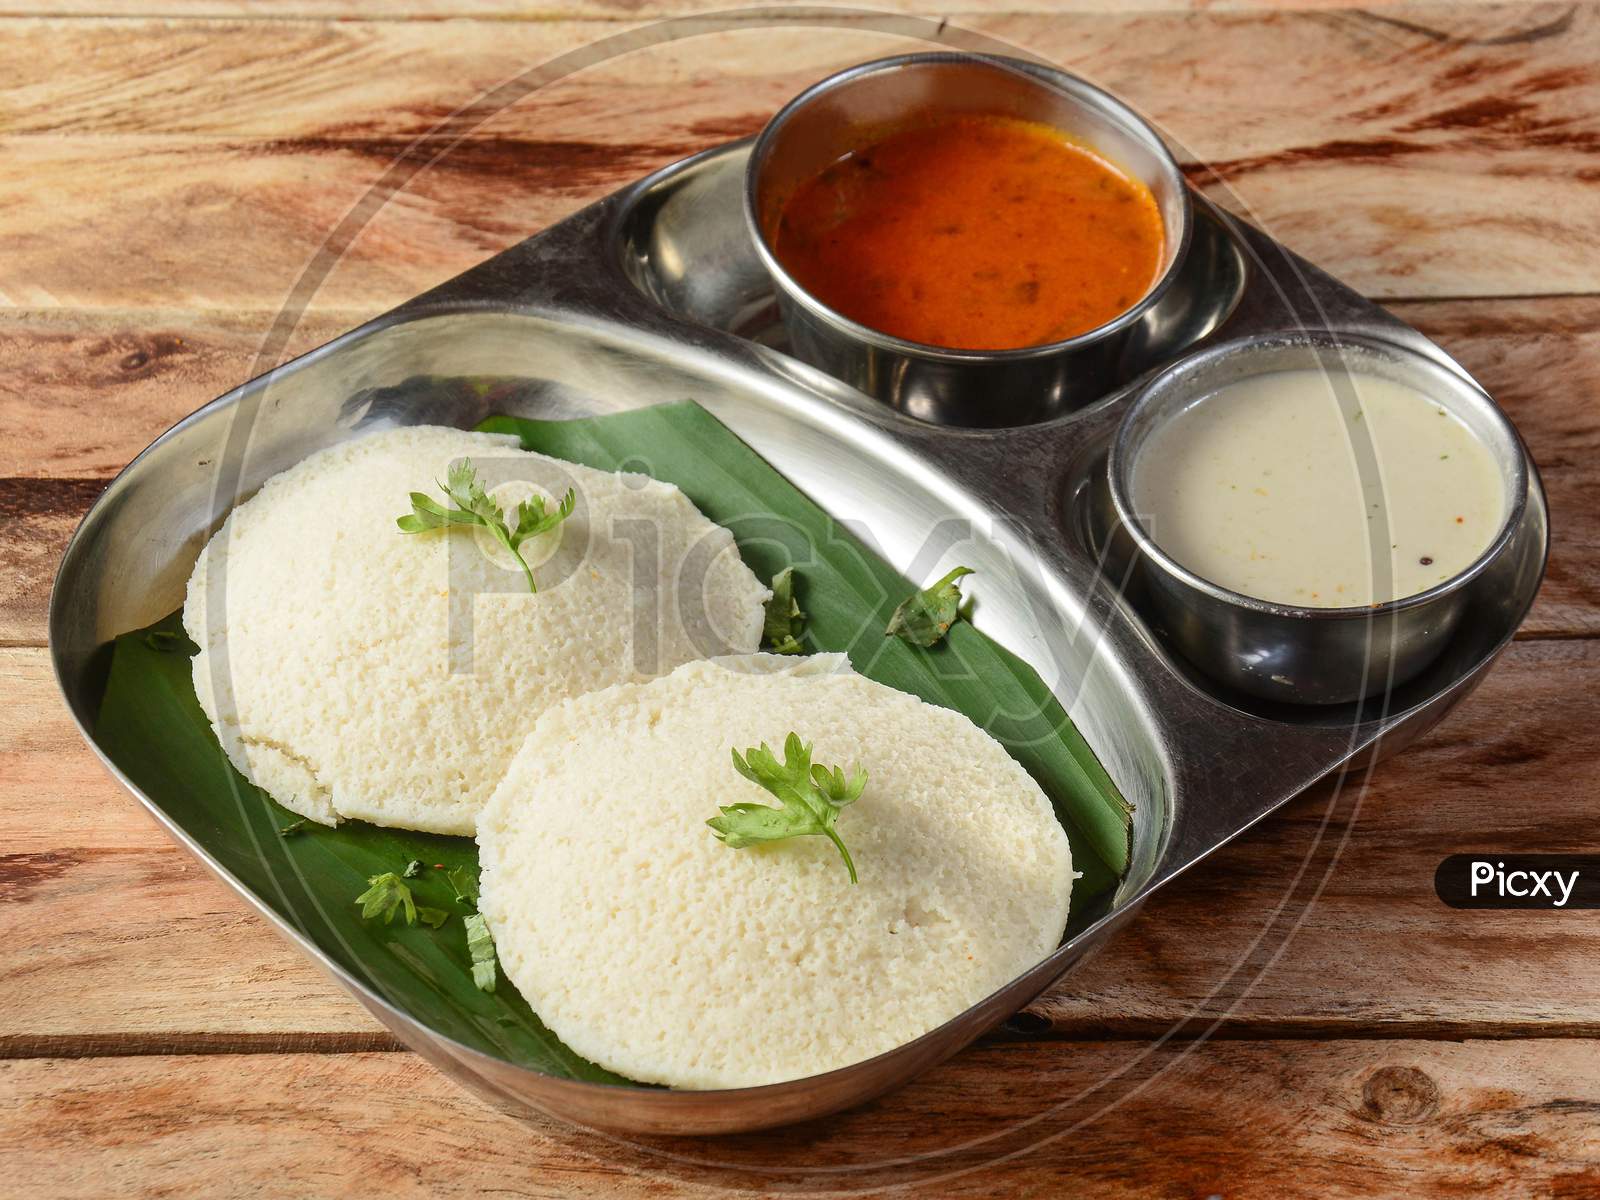 Idli Or Idly Is A Healthy Indian, Vegetarian, Traditional And Popular Steam Cooked Rice Cakes Served With Bowls Of Chutney And Sambar As Side Dishes.Selective Focus